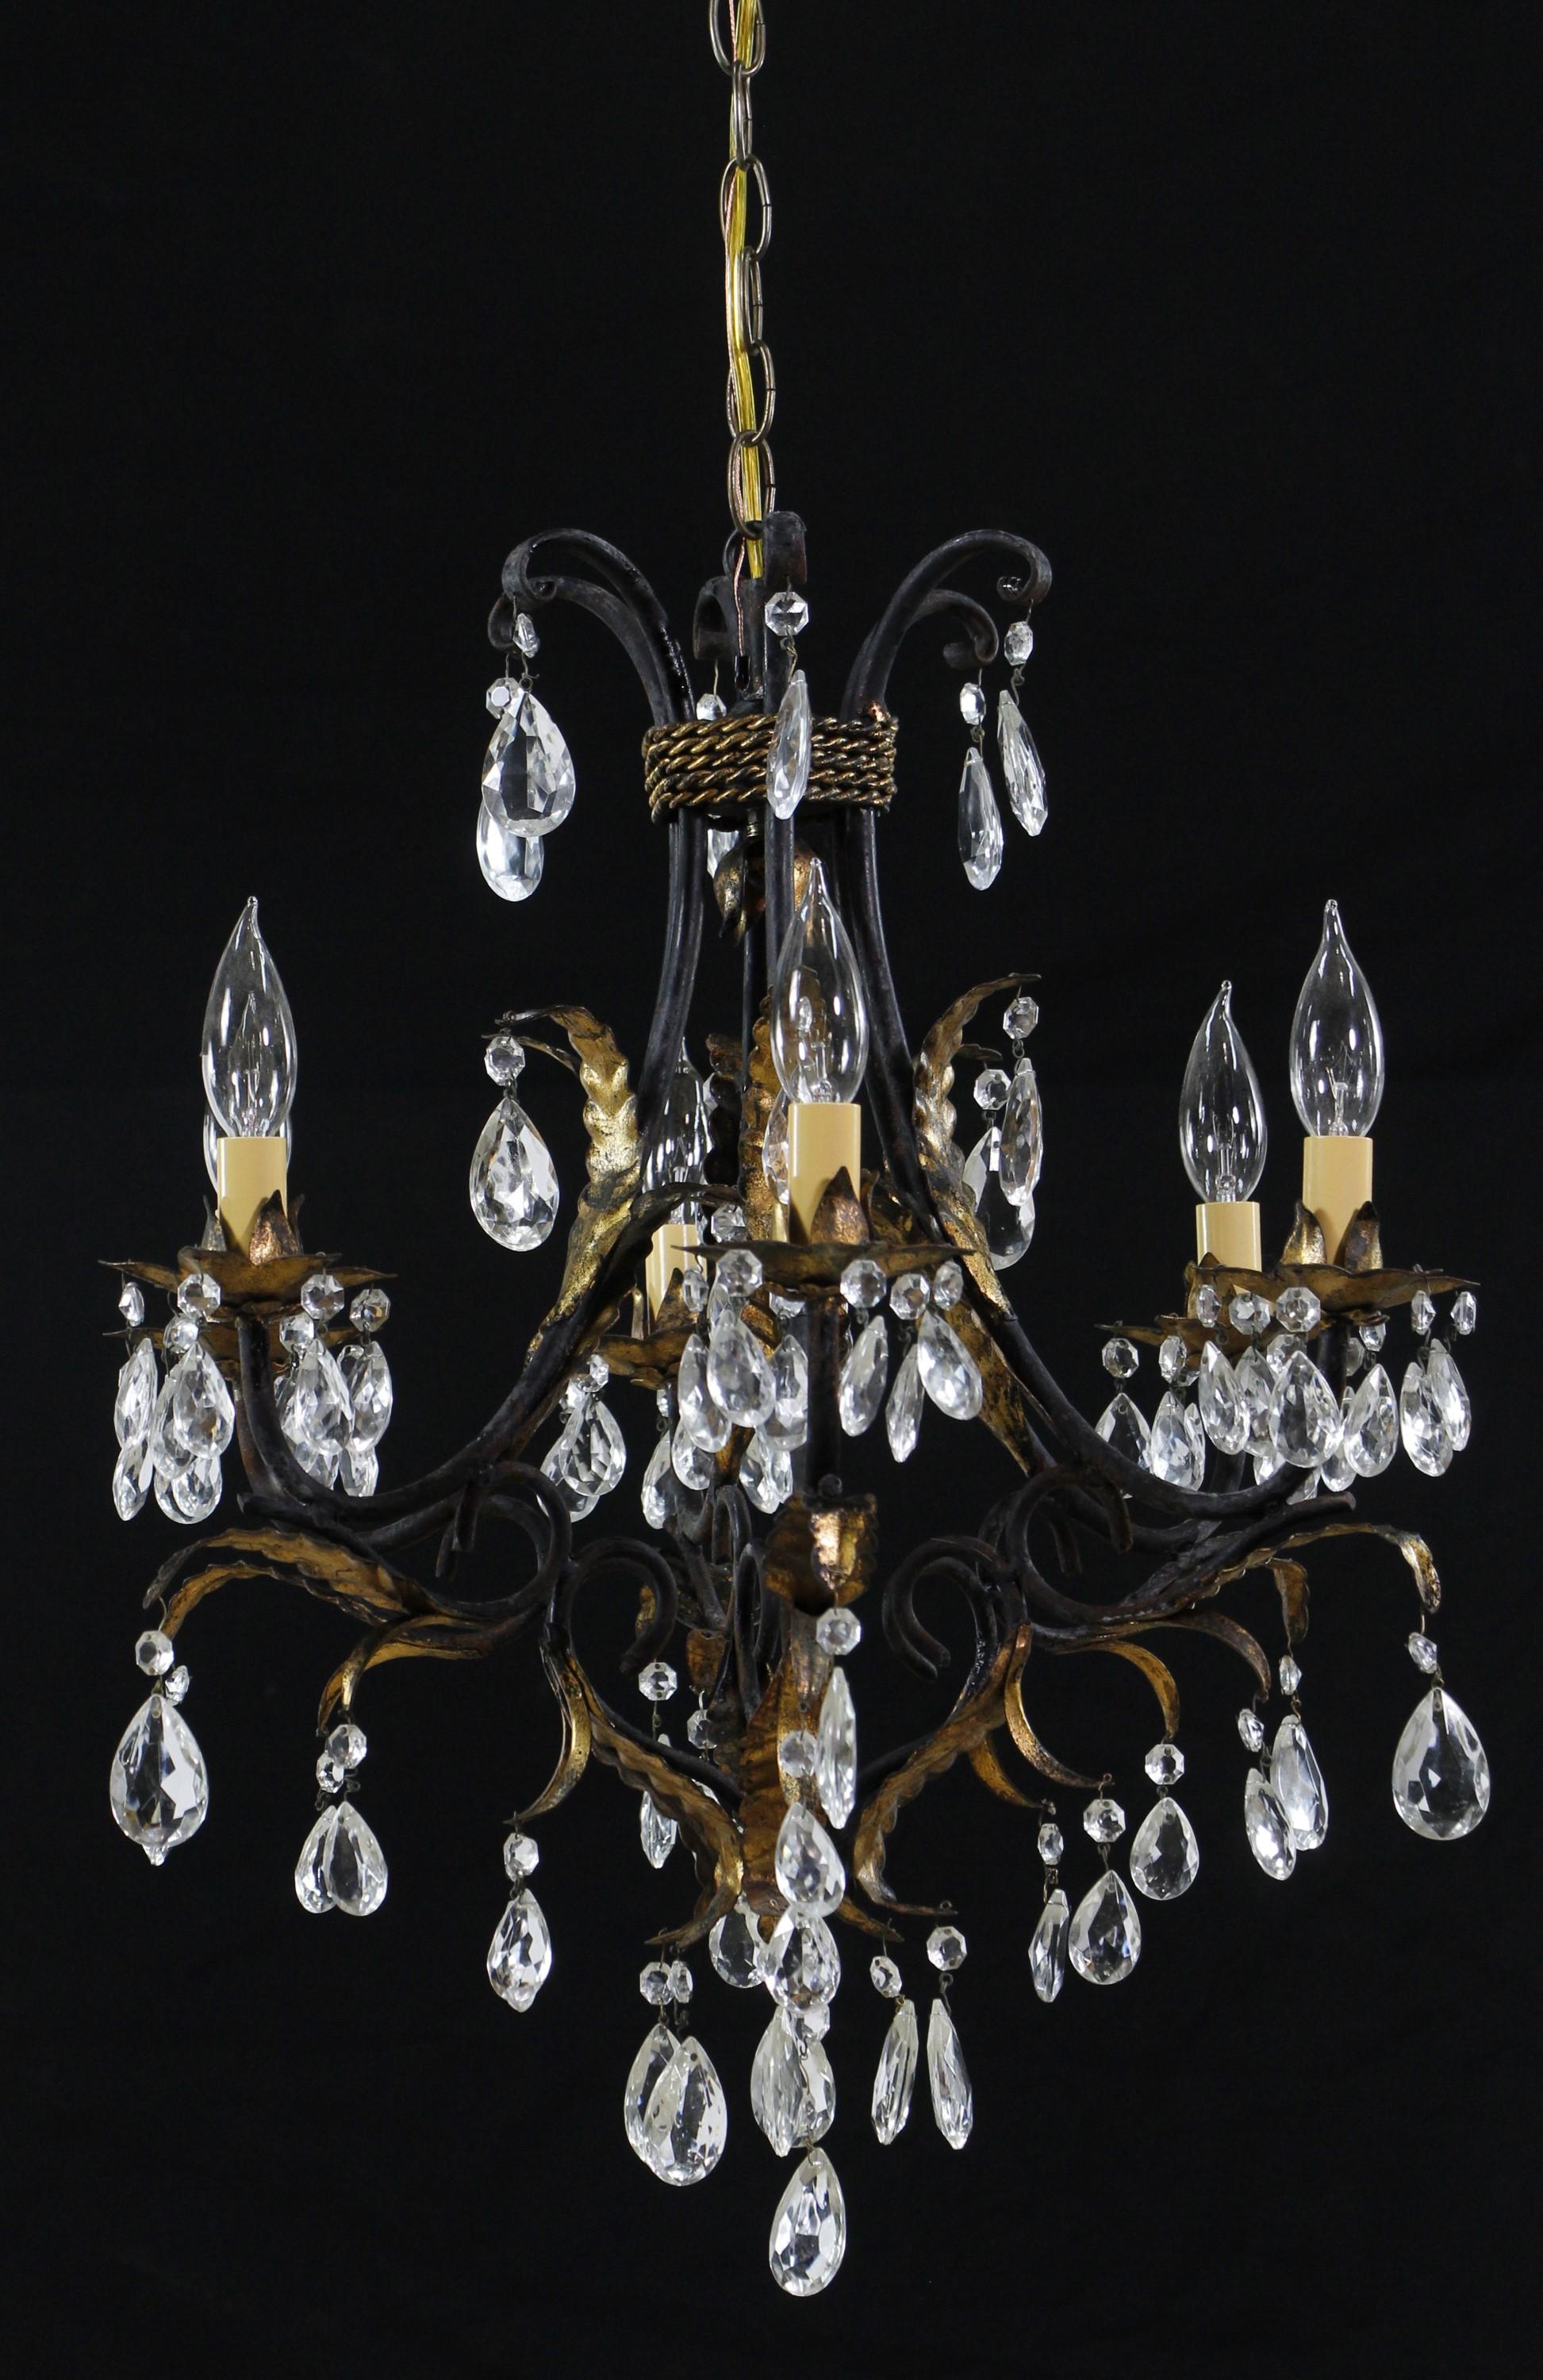 Tole Crystal Chandelier Black + Gold Gilt Leaves Ropes Vines In Good Condition For Sale In New York, NY